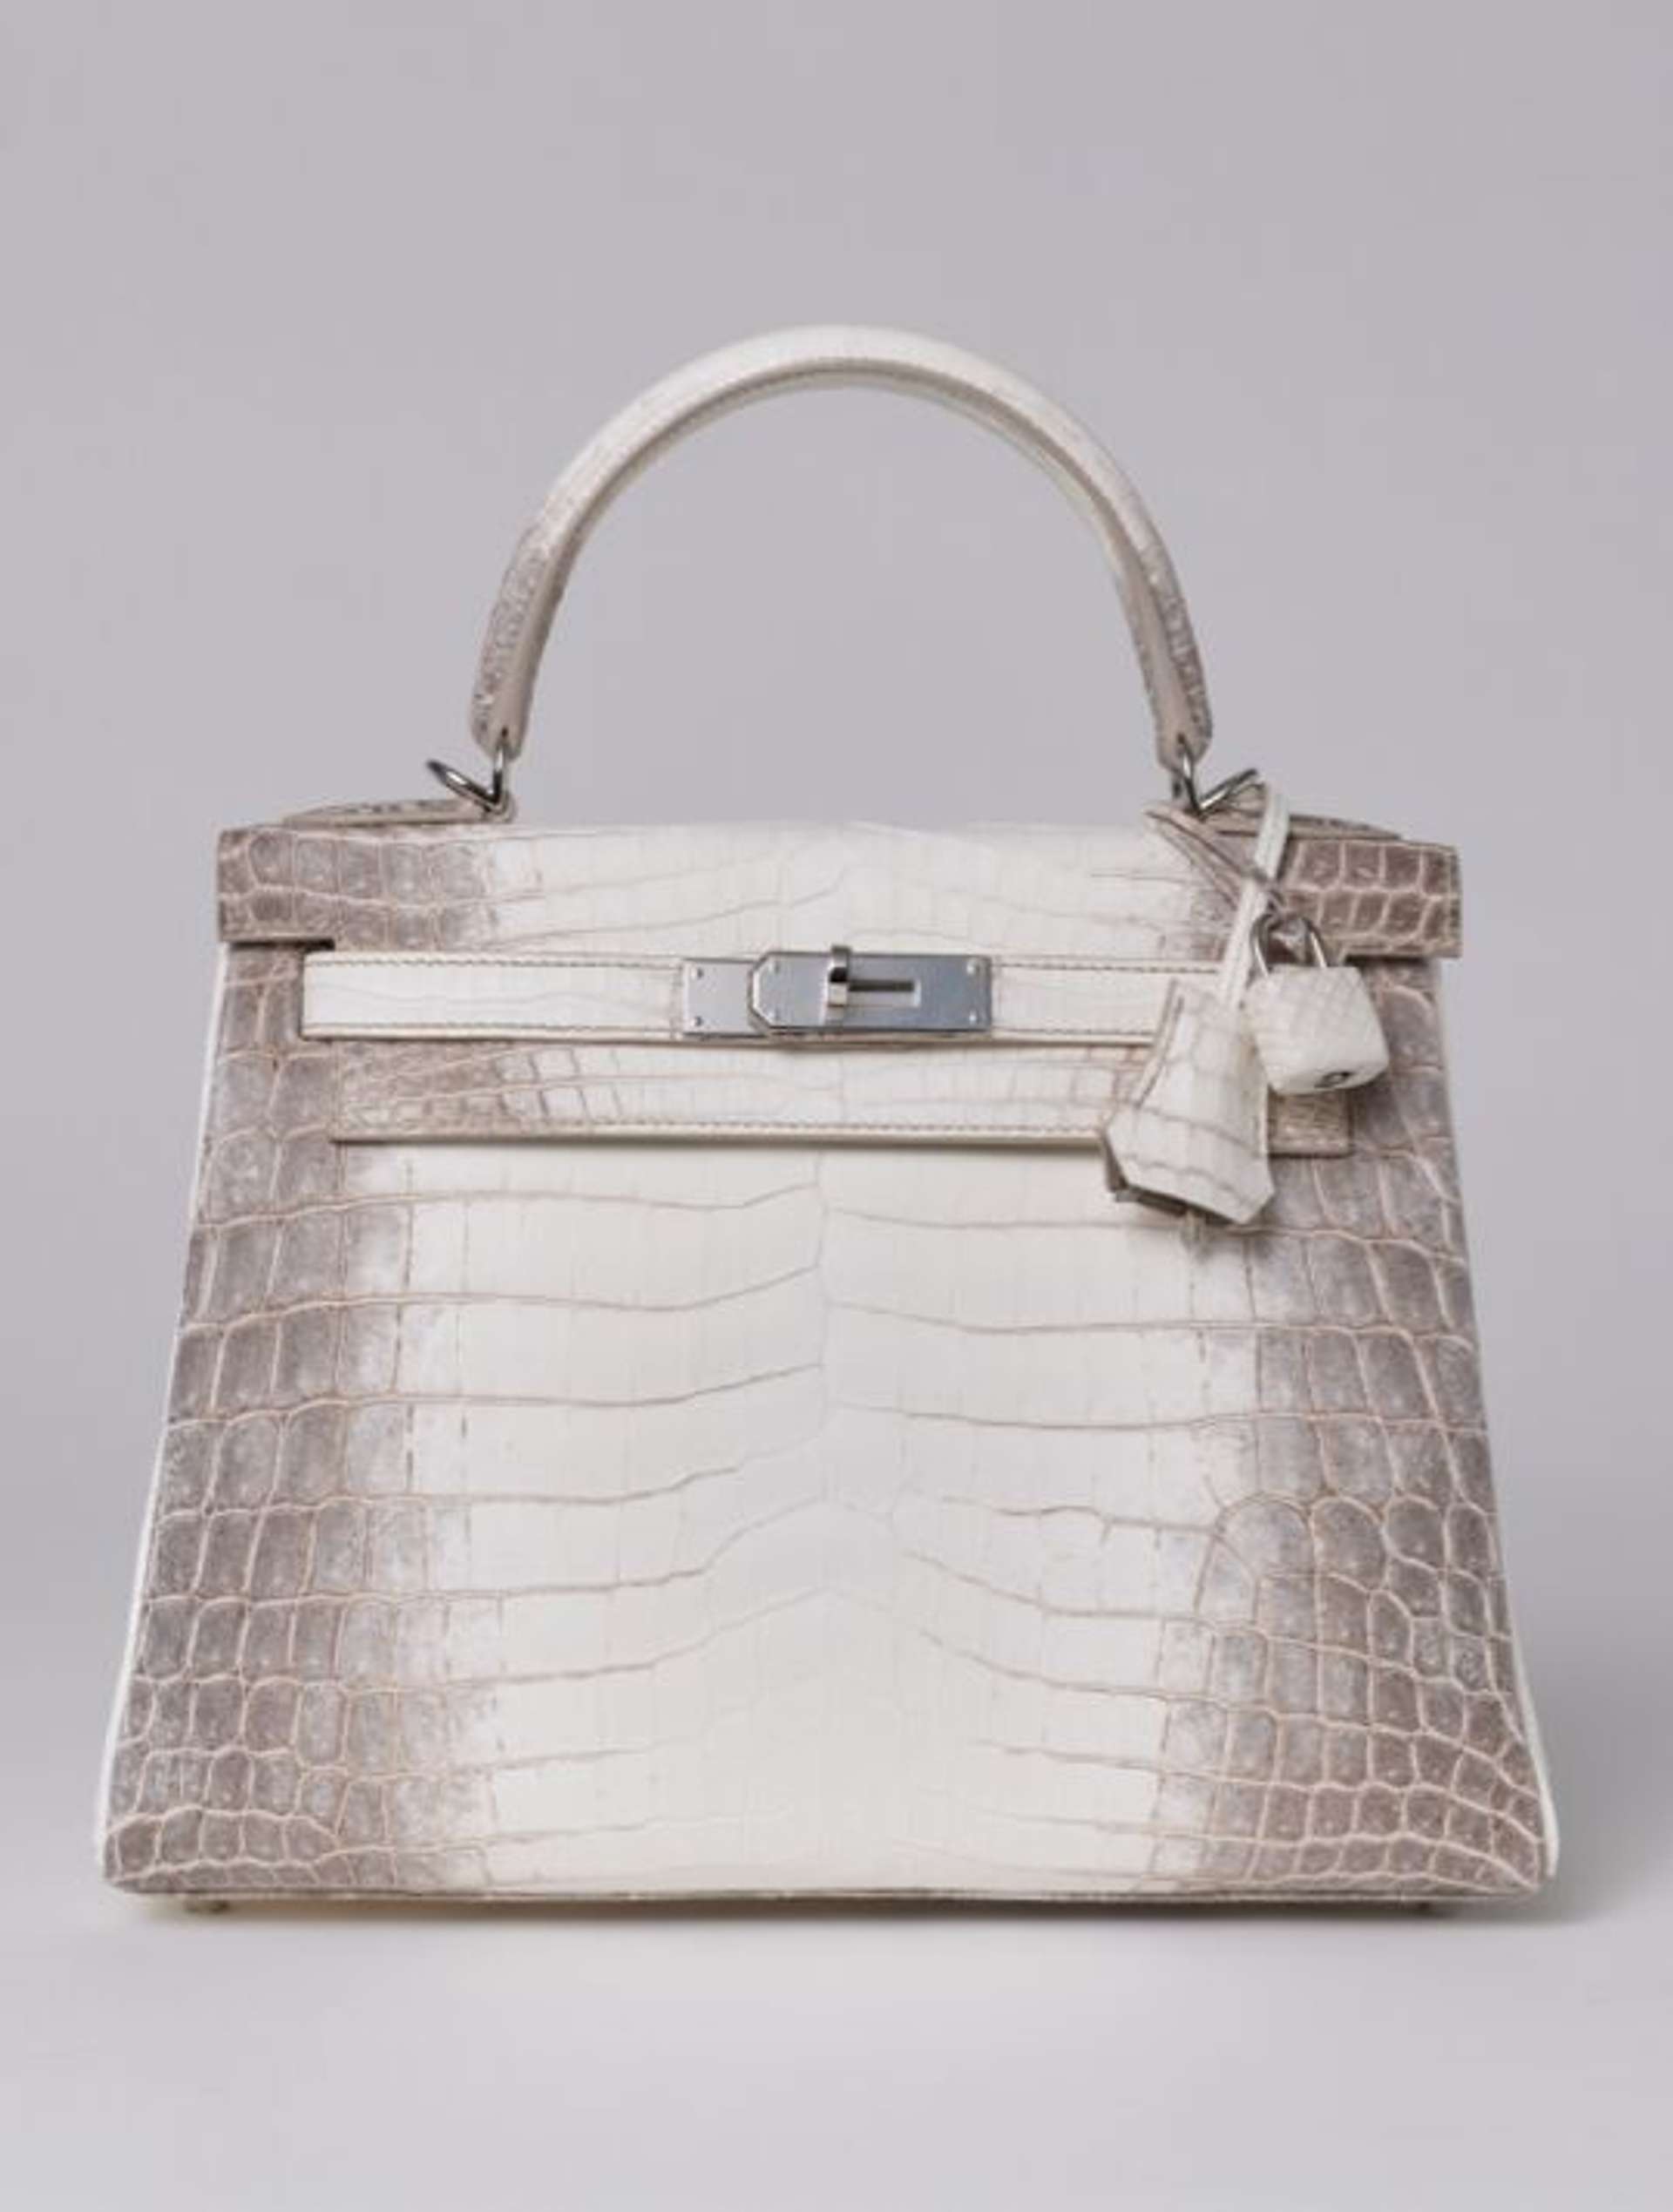 White himalayan crocodile leather was used in this endeavour to